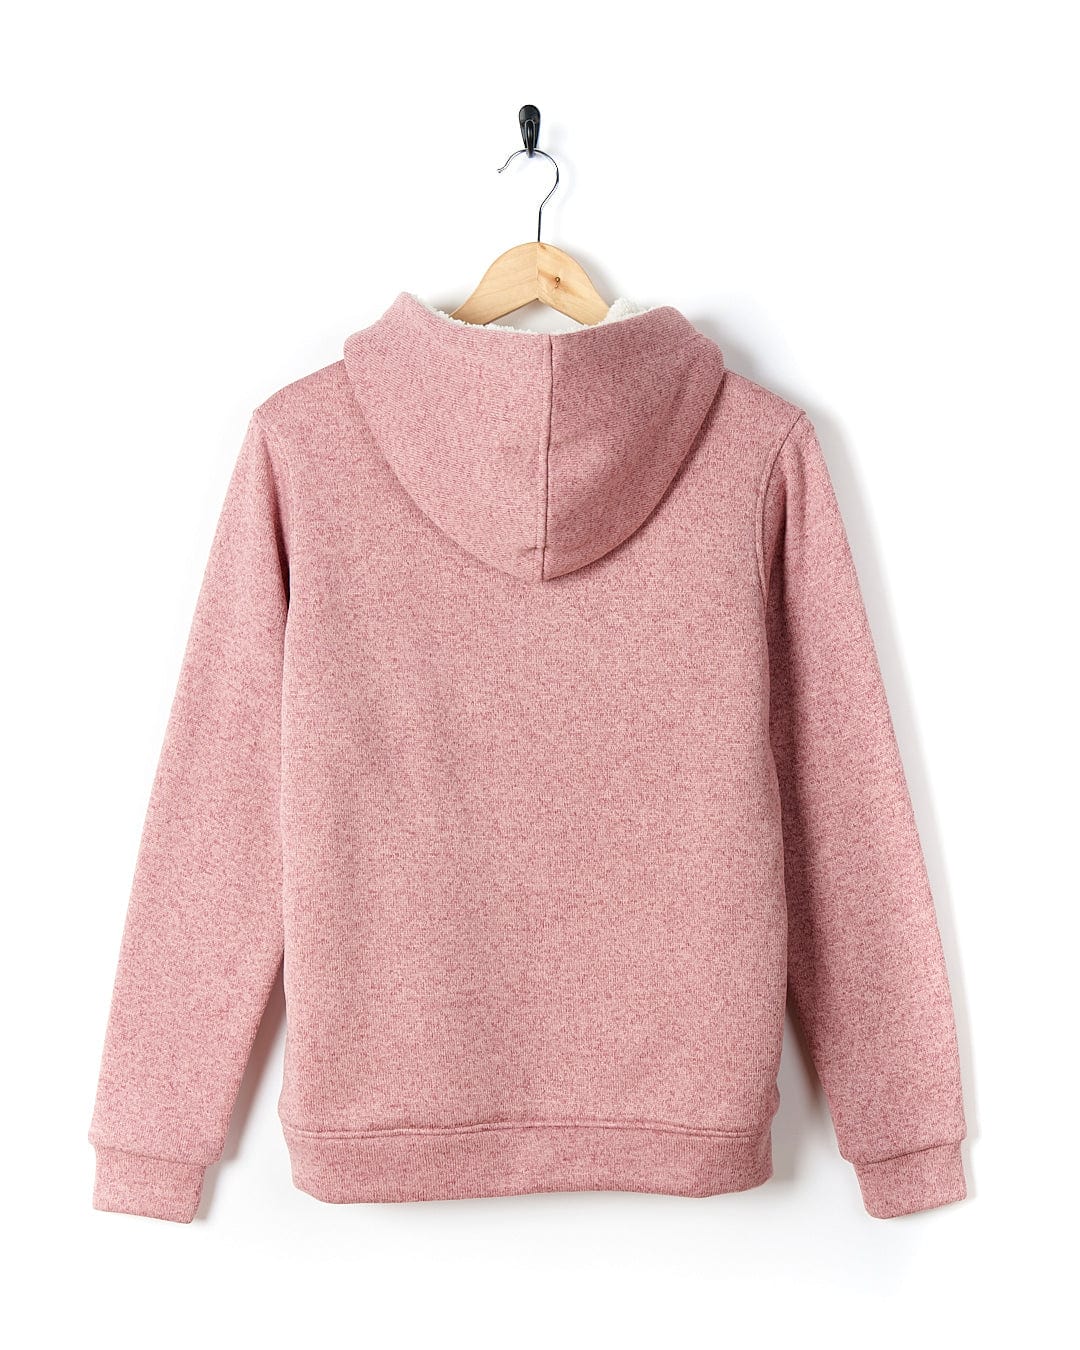 A comfortable Saltrock - Galak Womens Fur Lined Hoody - Pink hanging on a hanger.